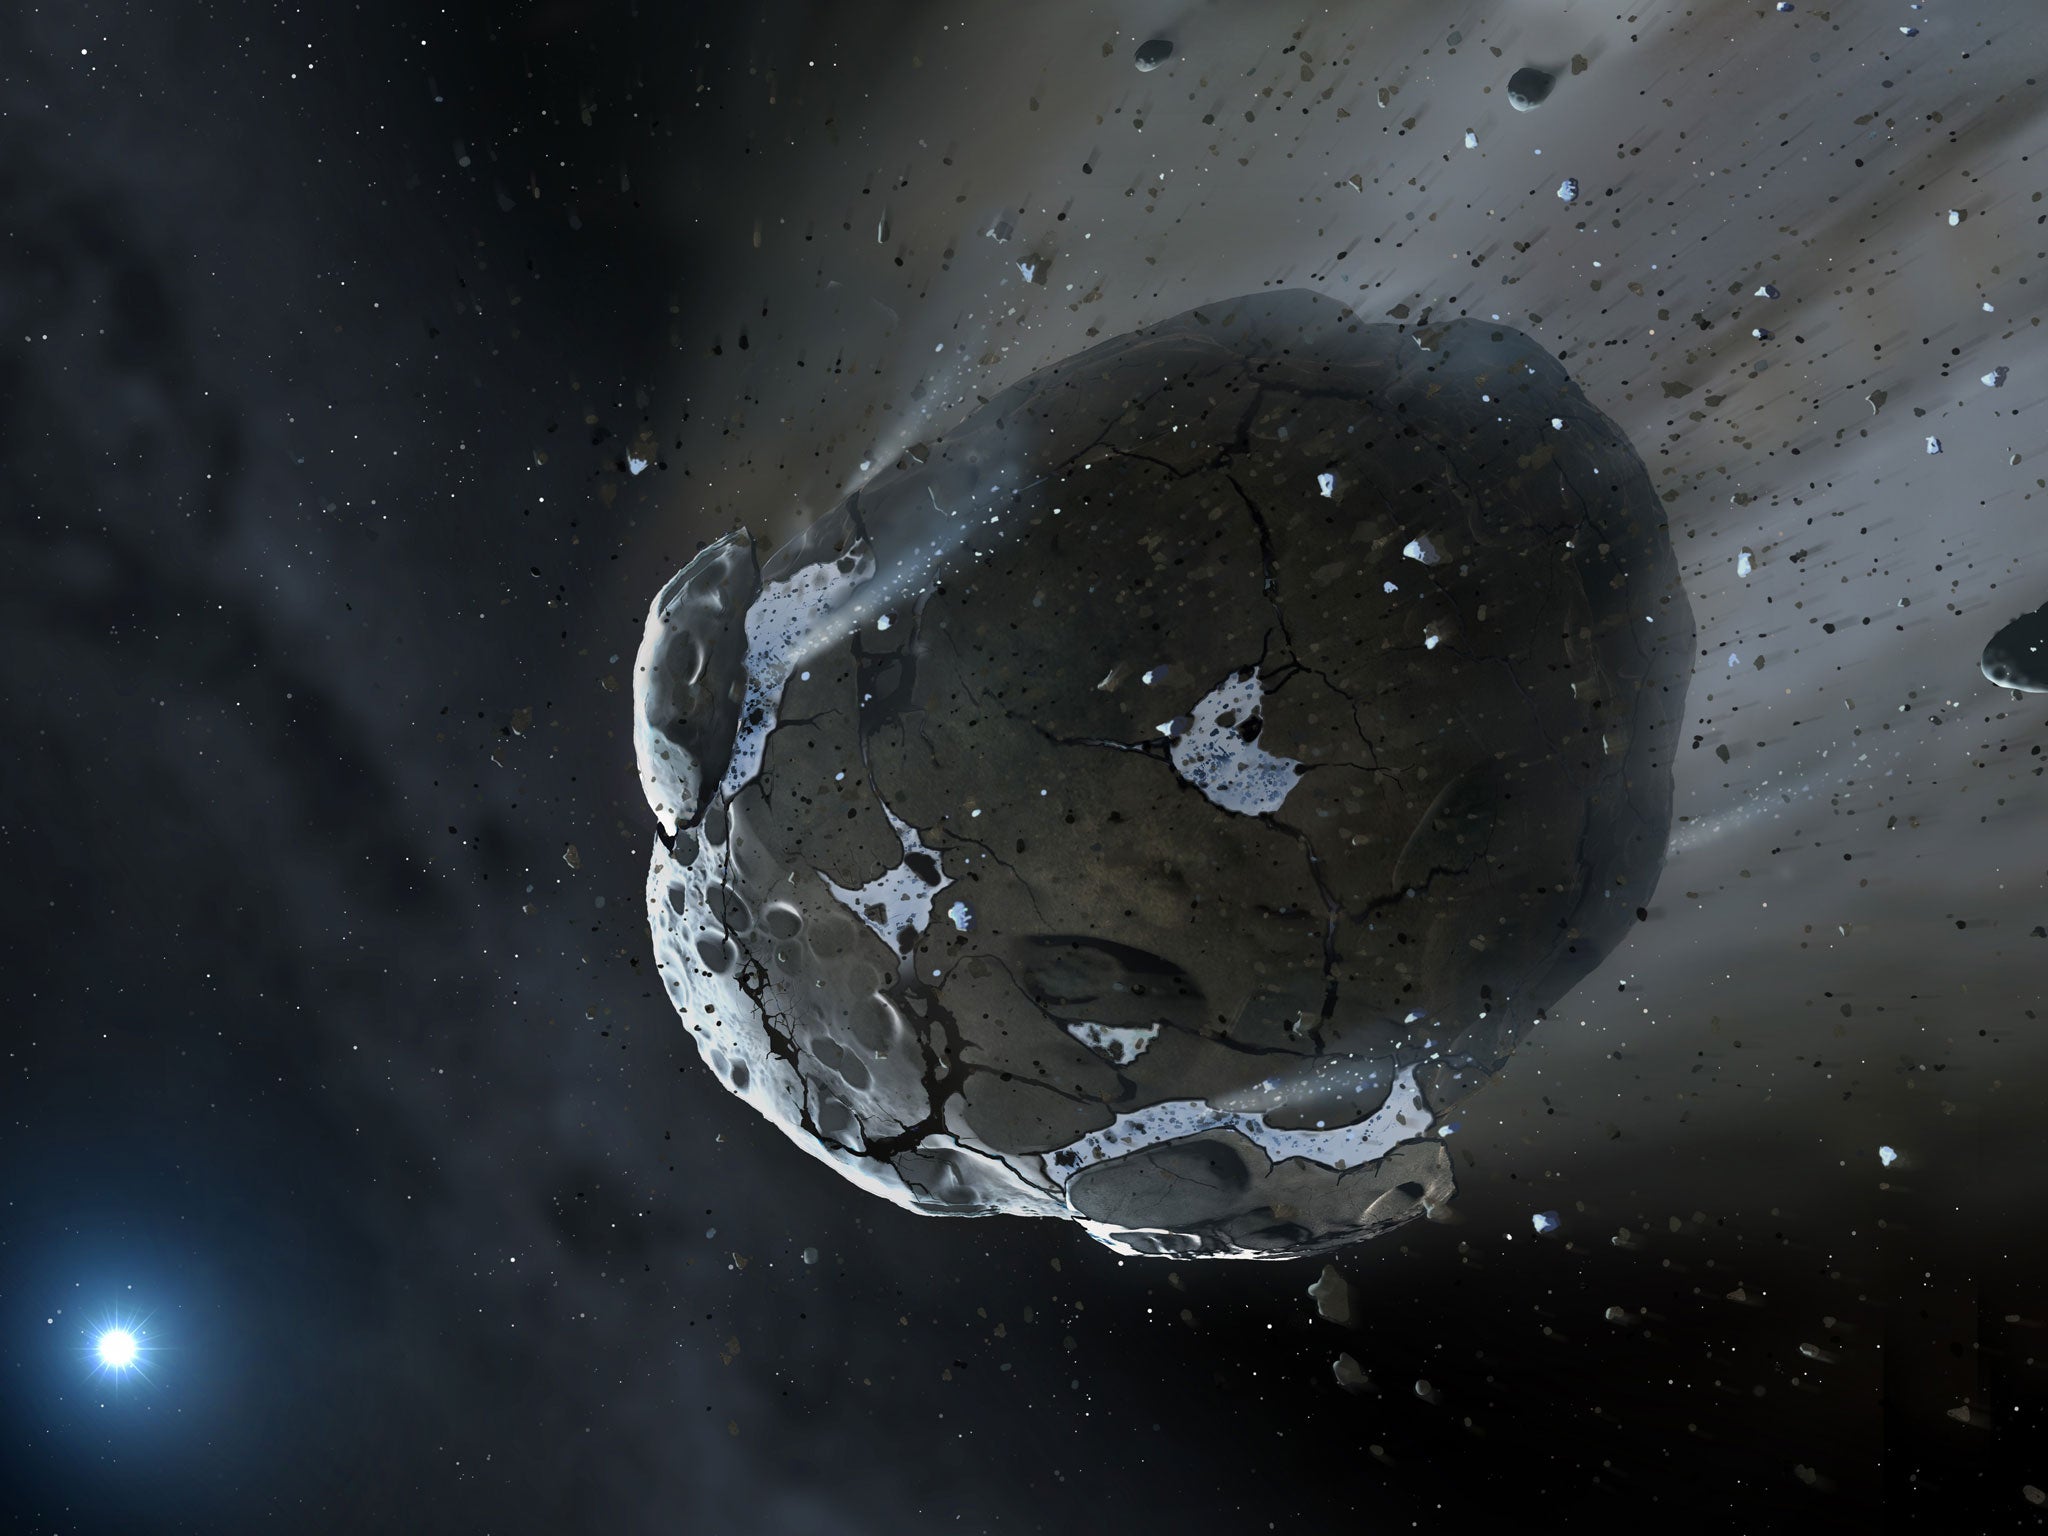 Asteroid Icarus (not pictured) will come within 21 lunar distances of the Earth